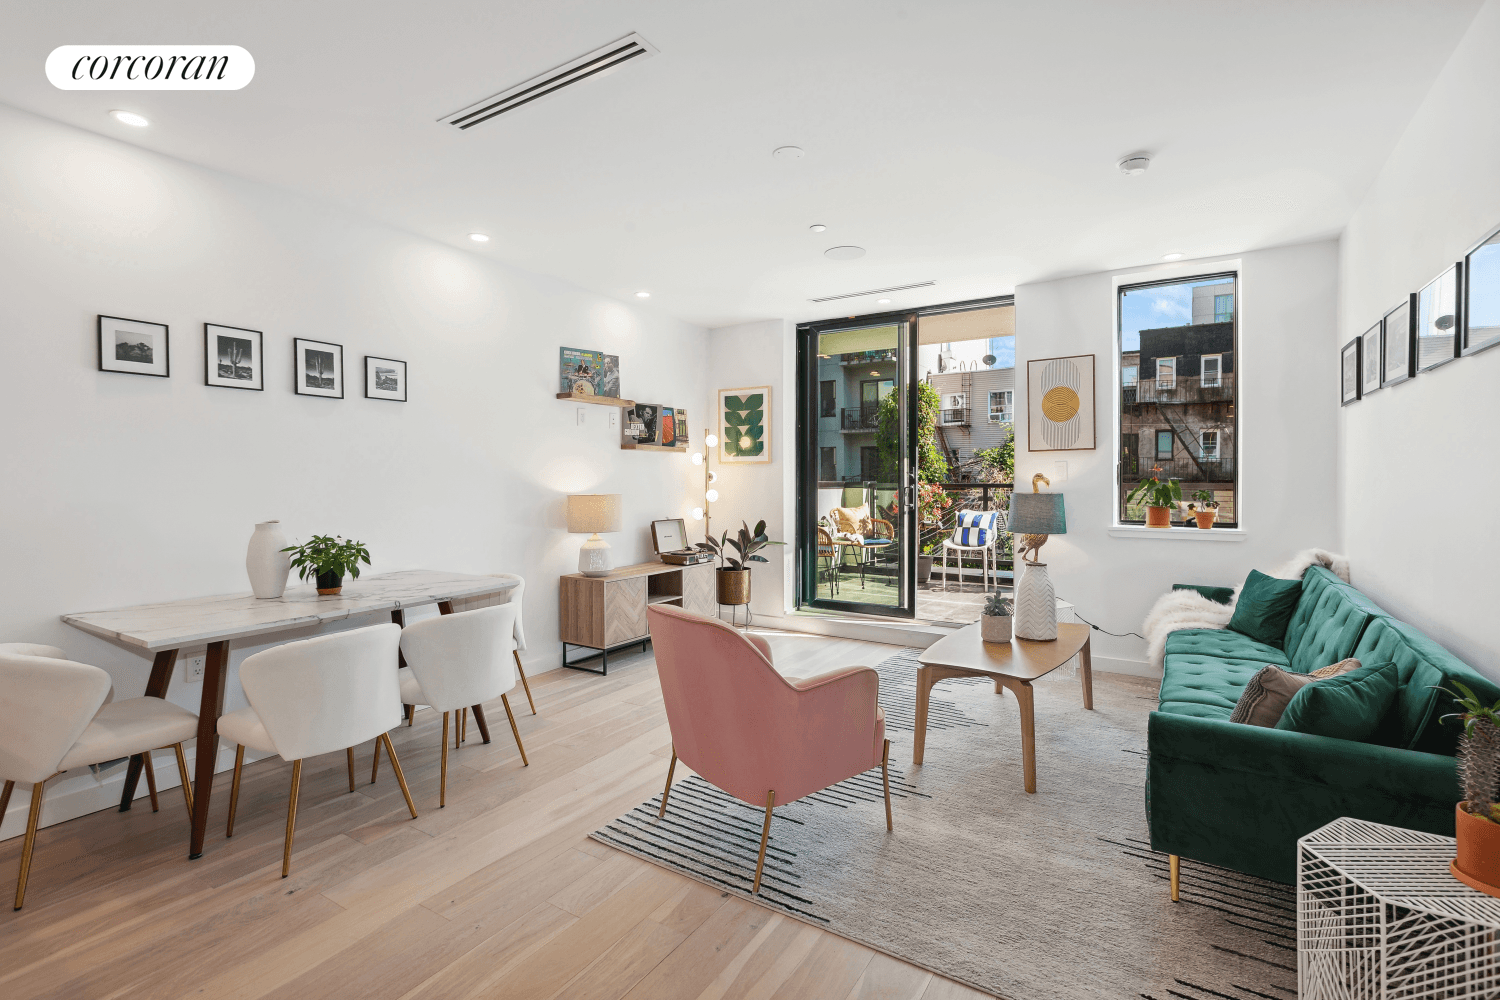 Introducing the next generation of Greenpoint's new luxury boutique condominium presenting 144 Freeman, a new collection of thoughtfully considered homes featuring 3 bedroom and townhouse style's garden duplex in a ...